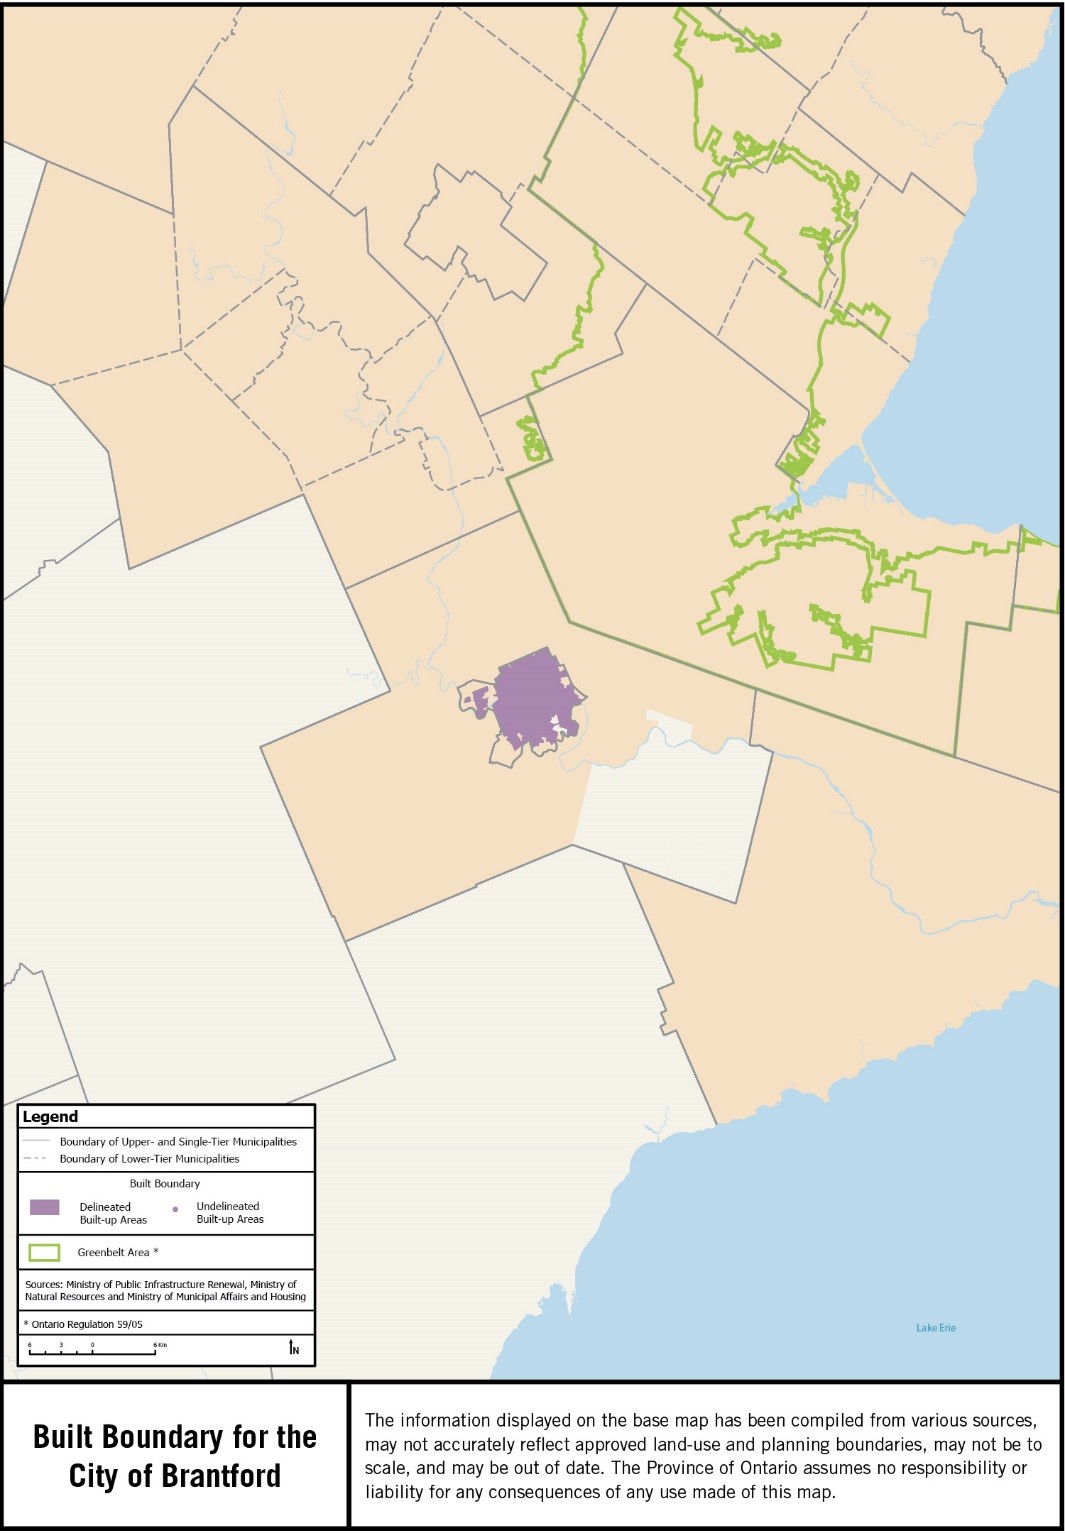 Map showing the built boundary for the City of Brantford.